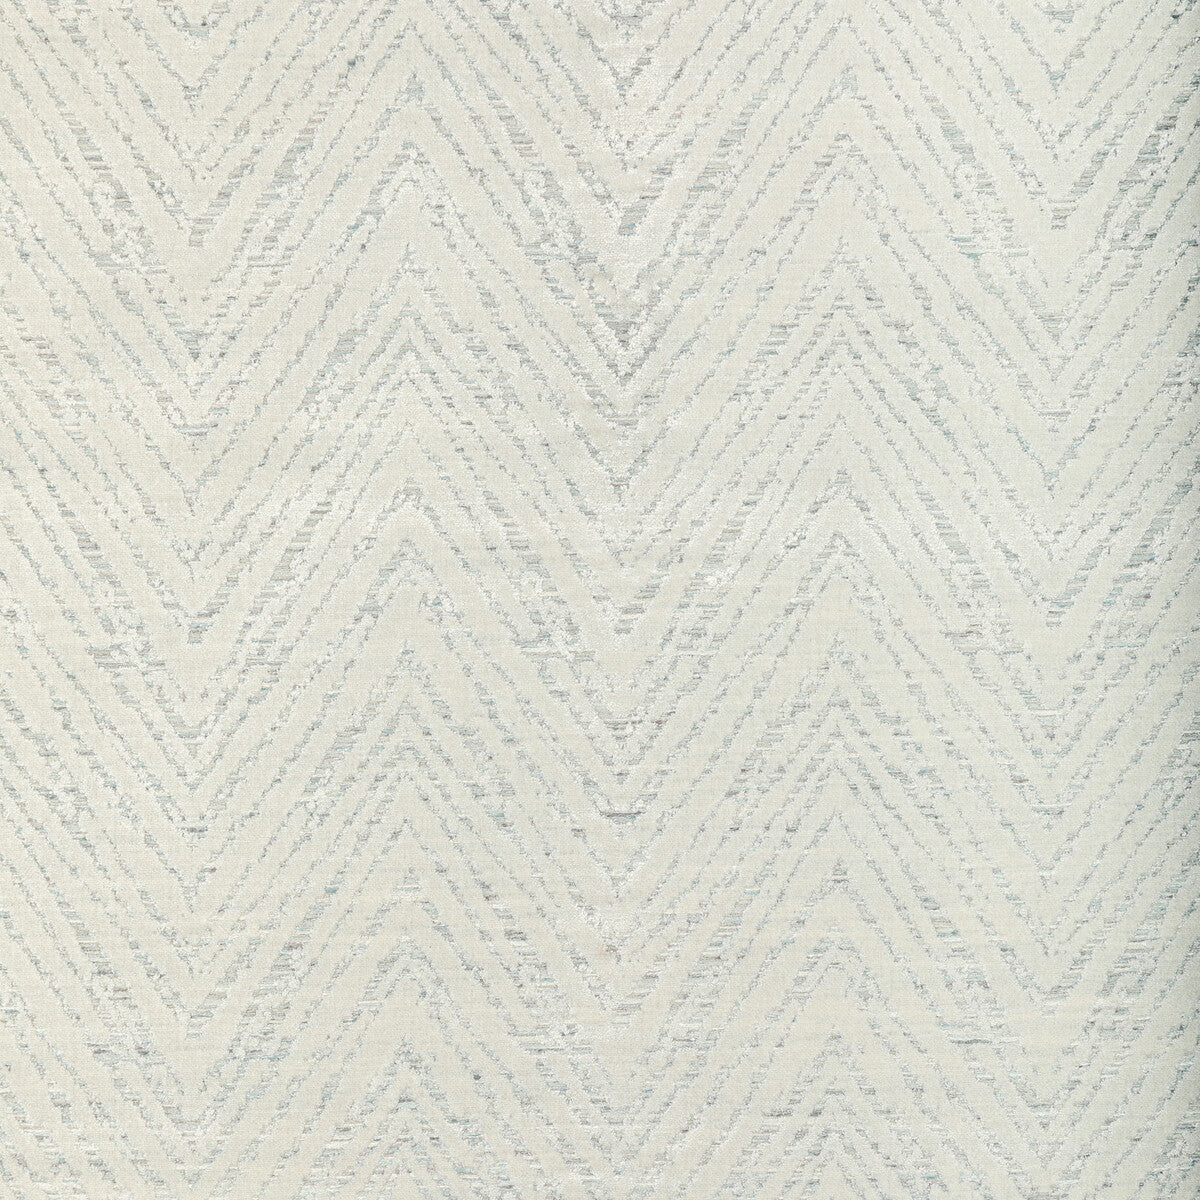 Gorge Hike fabric in pearl color - pattern 36365.11.0 - by Kravet Design in the Jeffrey Alan Marks Seascapes collection